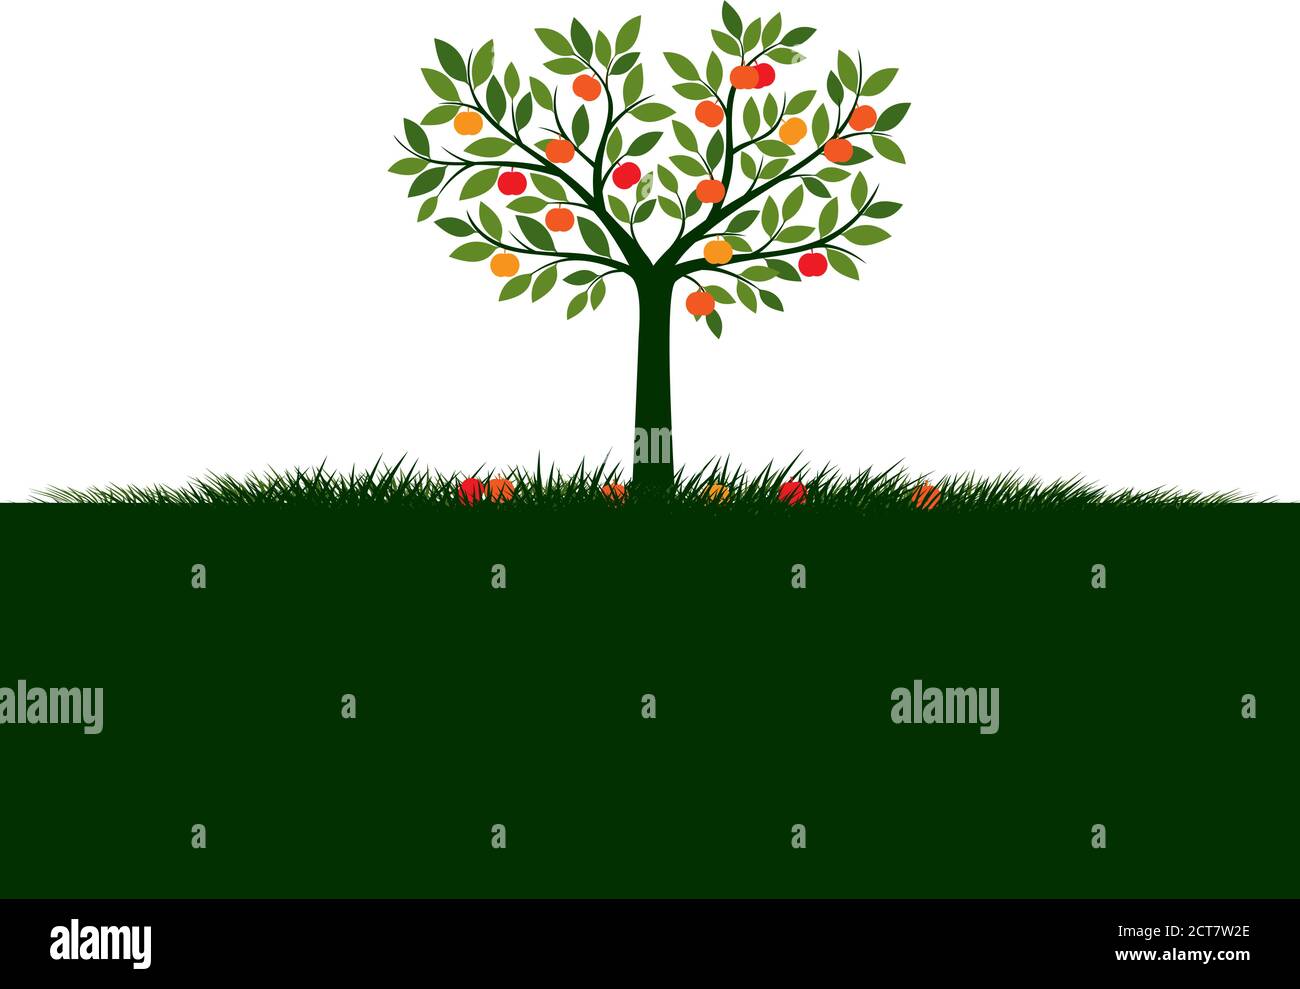 Shape of apple Tree with Leaves and Fruits. Vector outline Illustration. Plant in Garden. Stock Vector